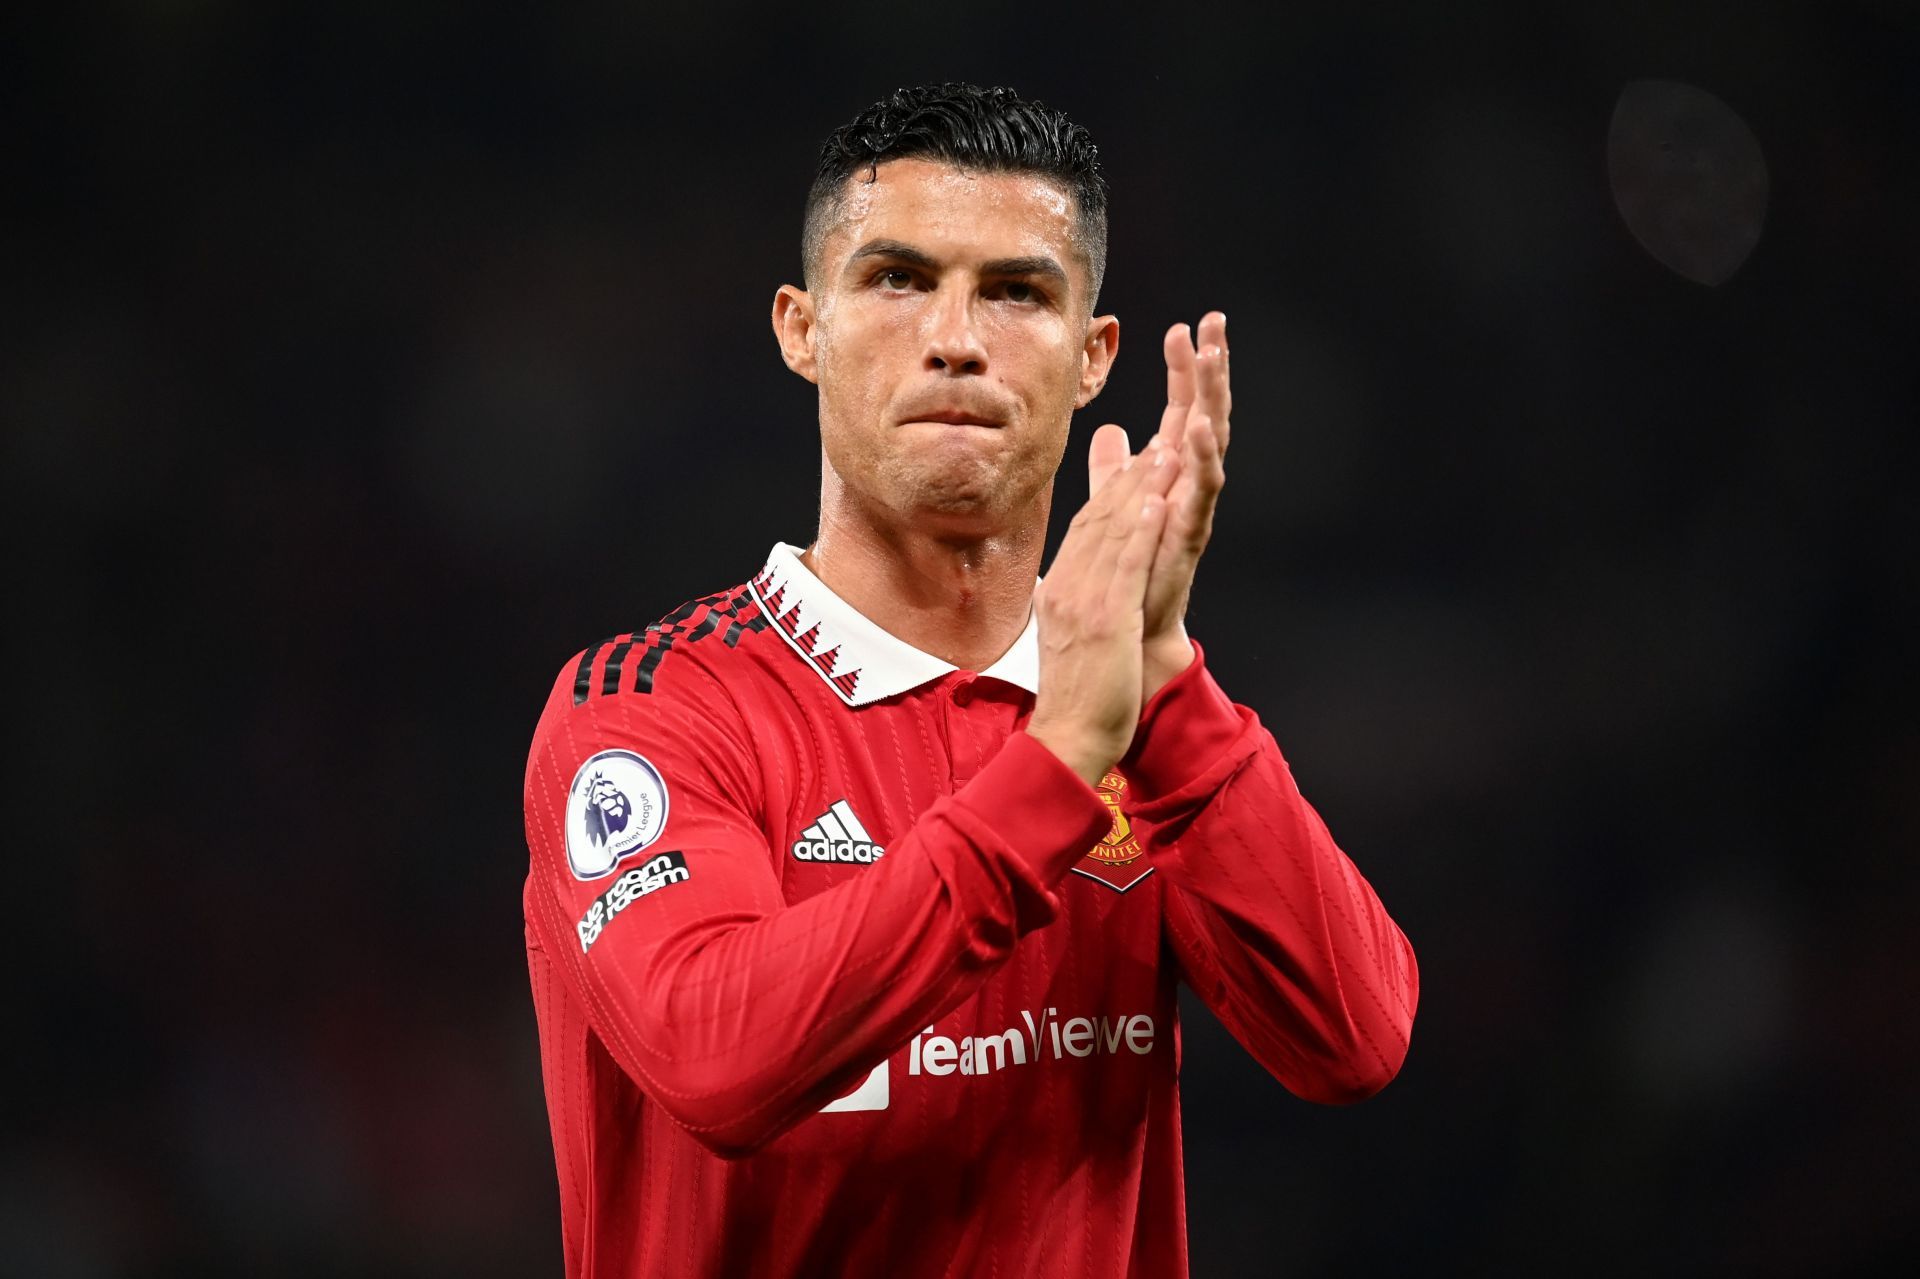 Ronaldo has scored the most goals in the UEFA Champions League